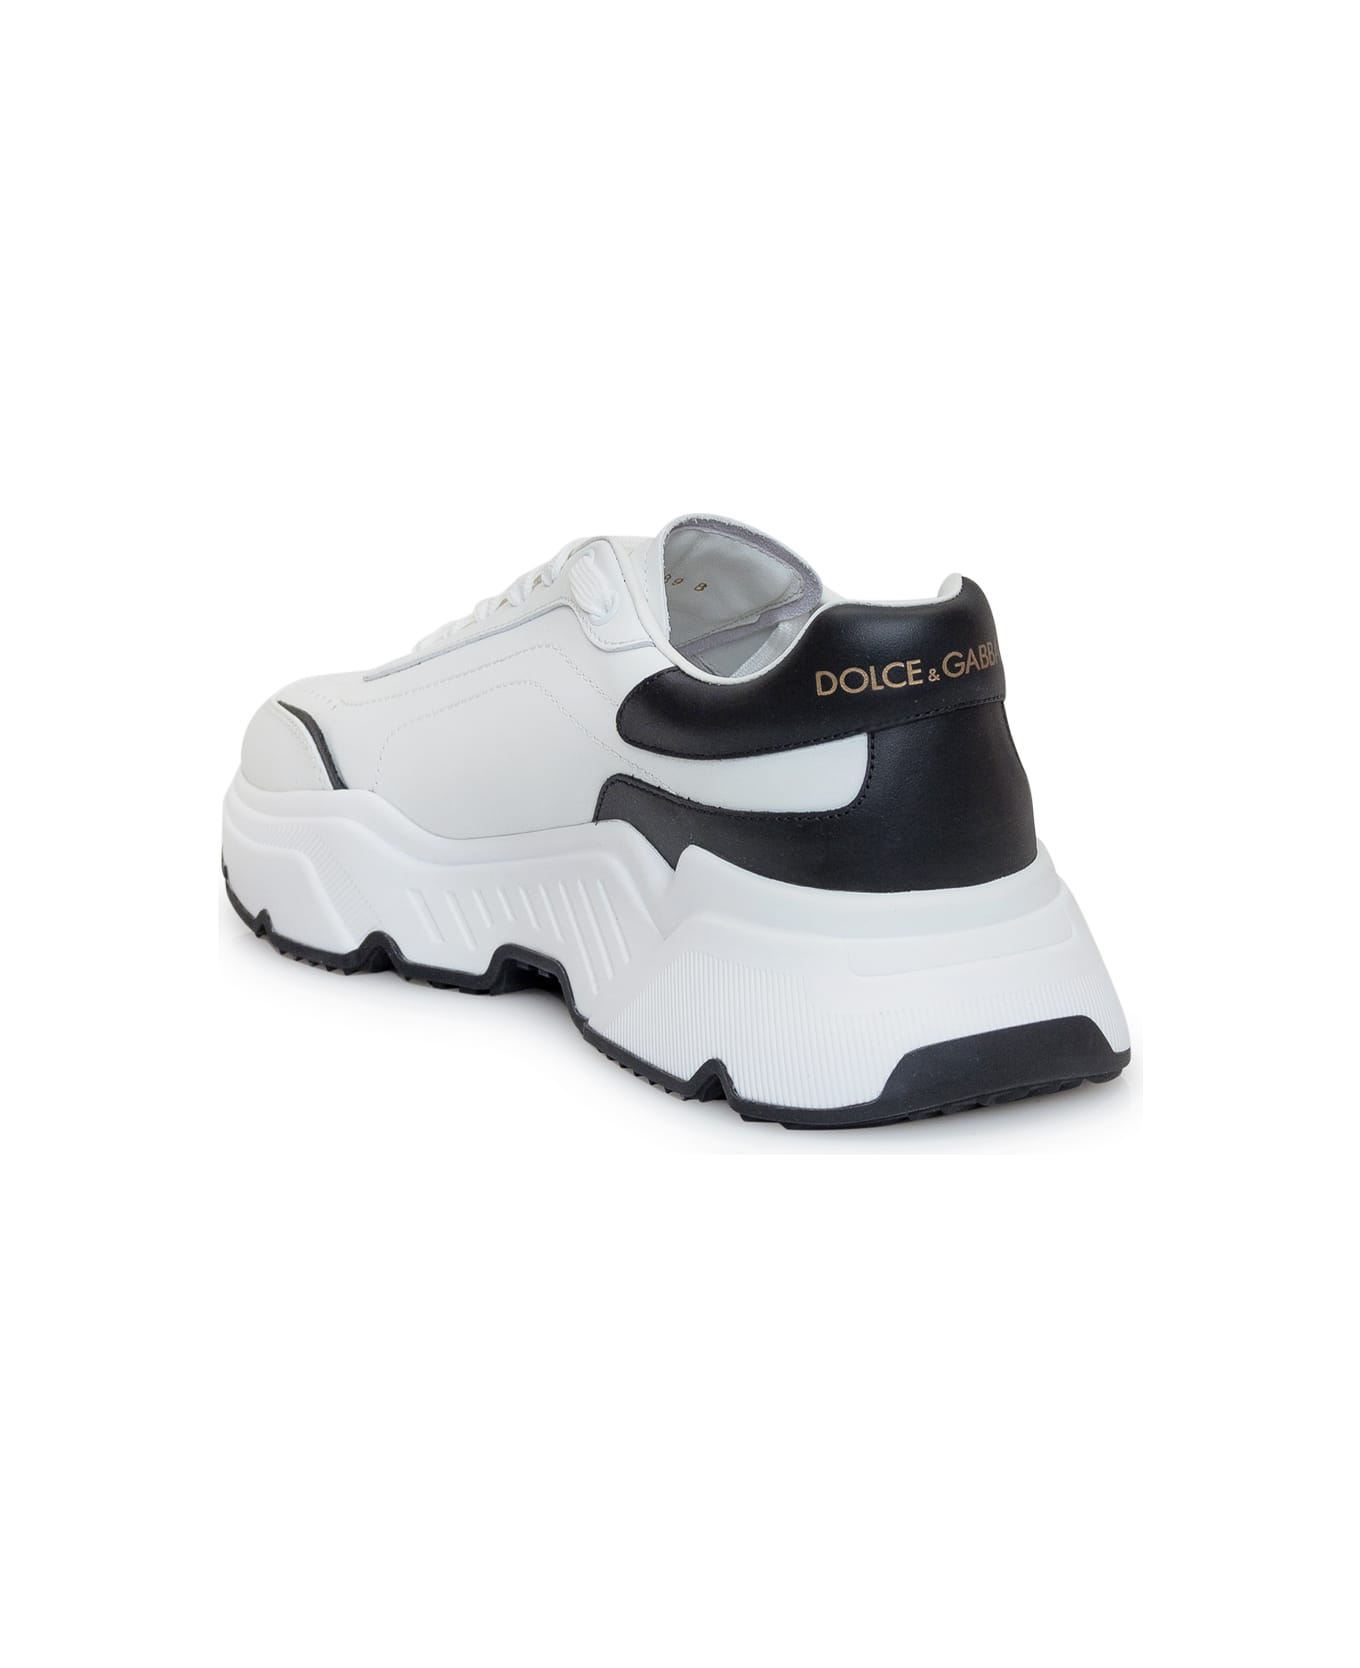 Dolce & Gabbana Daymaster Sneakers - White